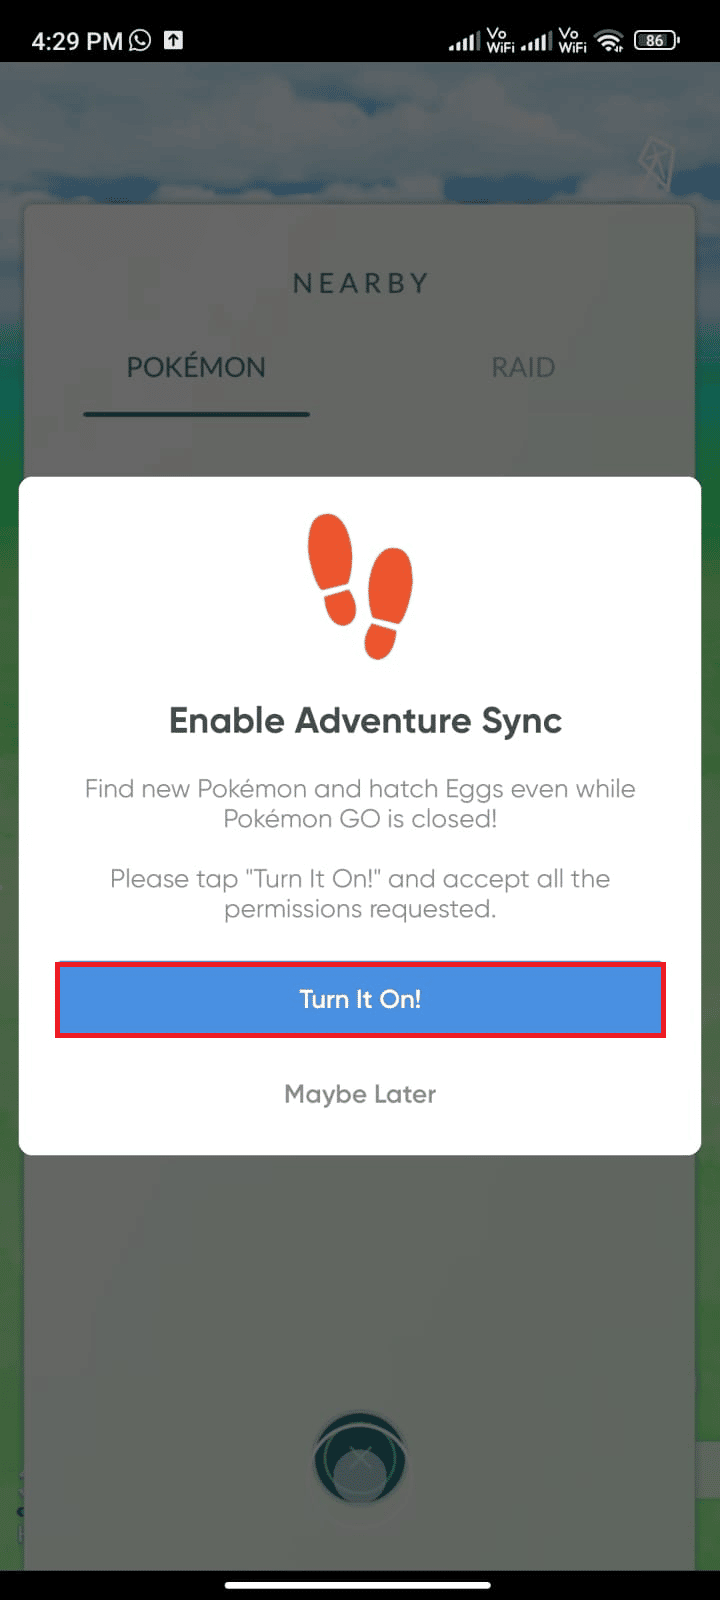 Now, turn on Adventure Sync and enable it. Confirm the prompt by tapping Turn It On. fix Pokémon Go adventure sync not working